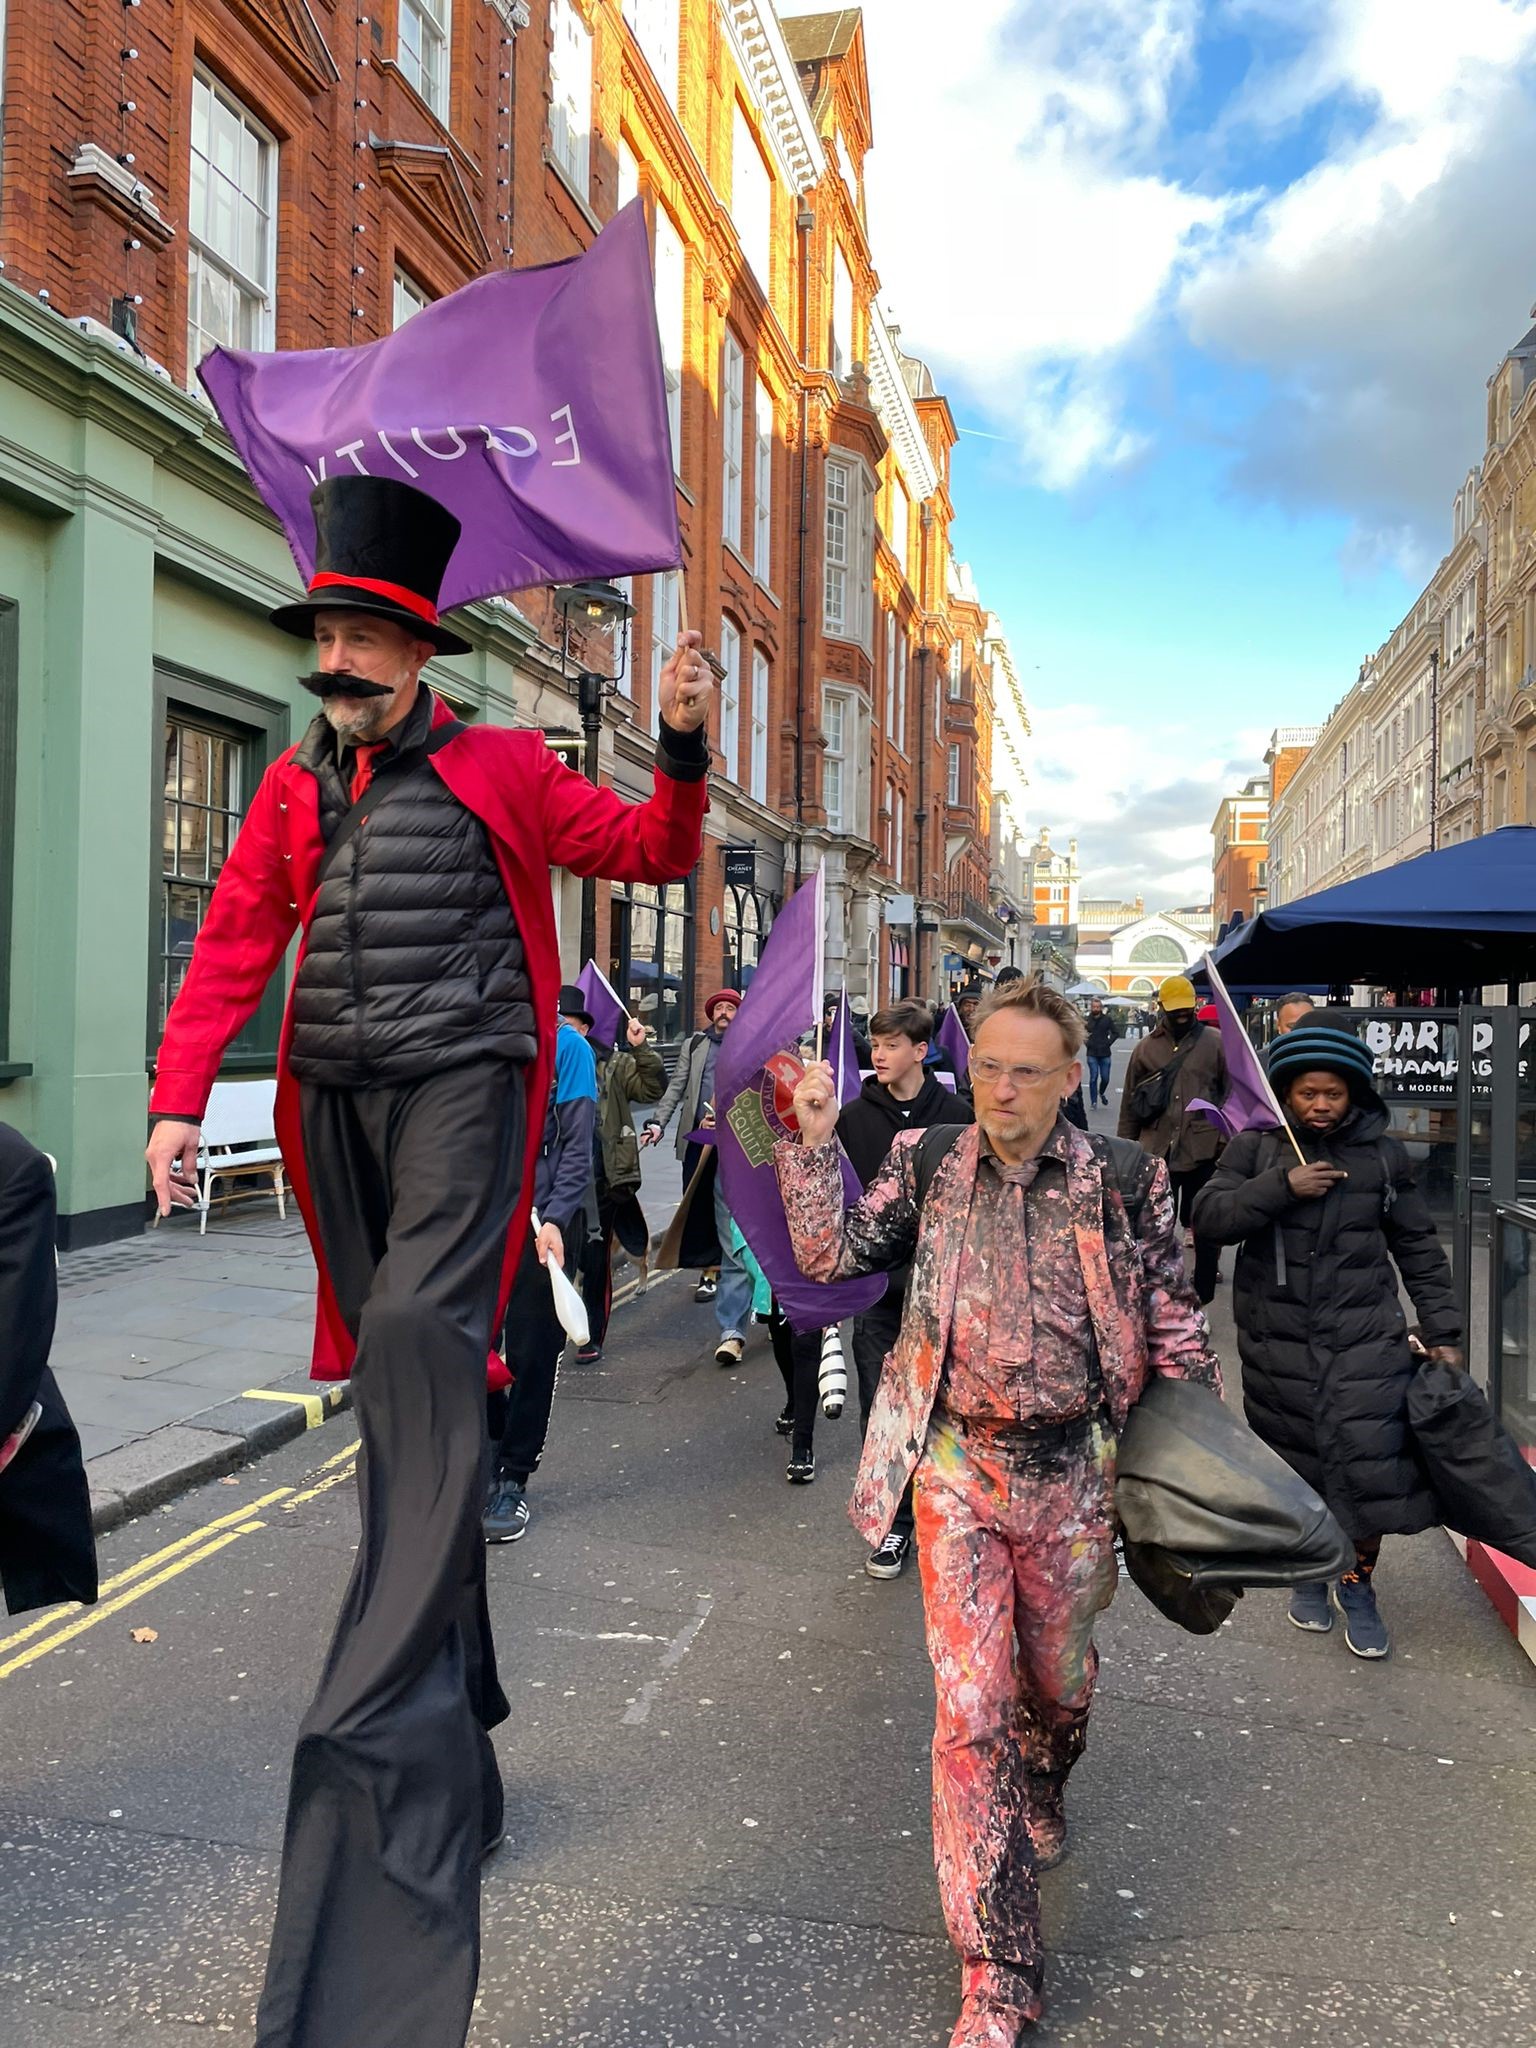 photo shows Equity member in ring master costume on slits walking through the streets of covent garden on slits followed by the street performers network waving equity flags